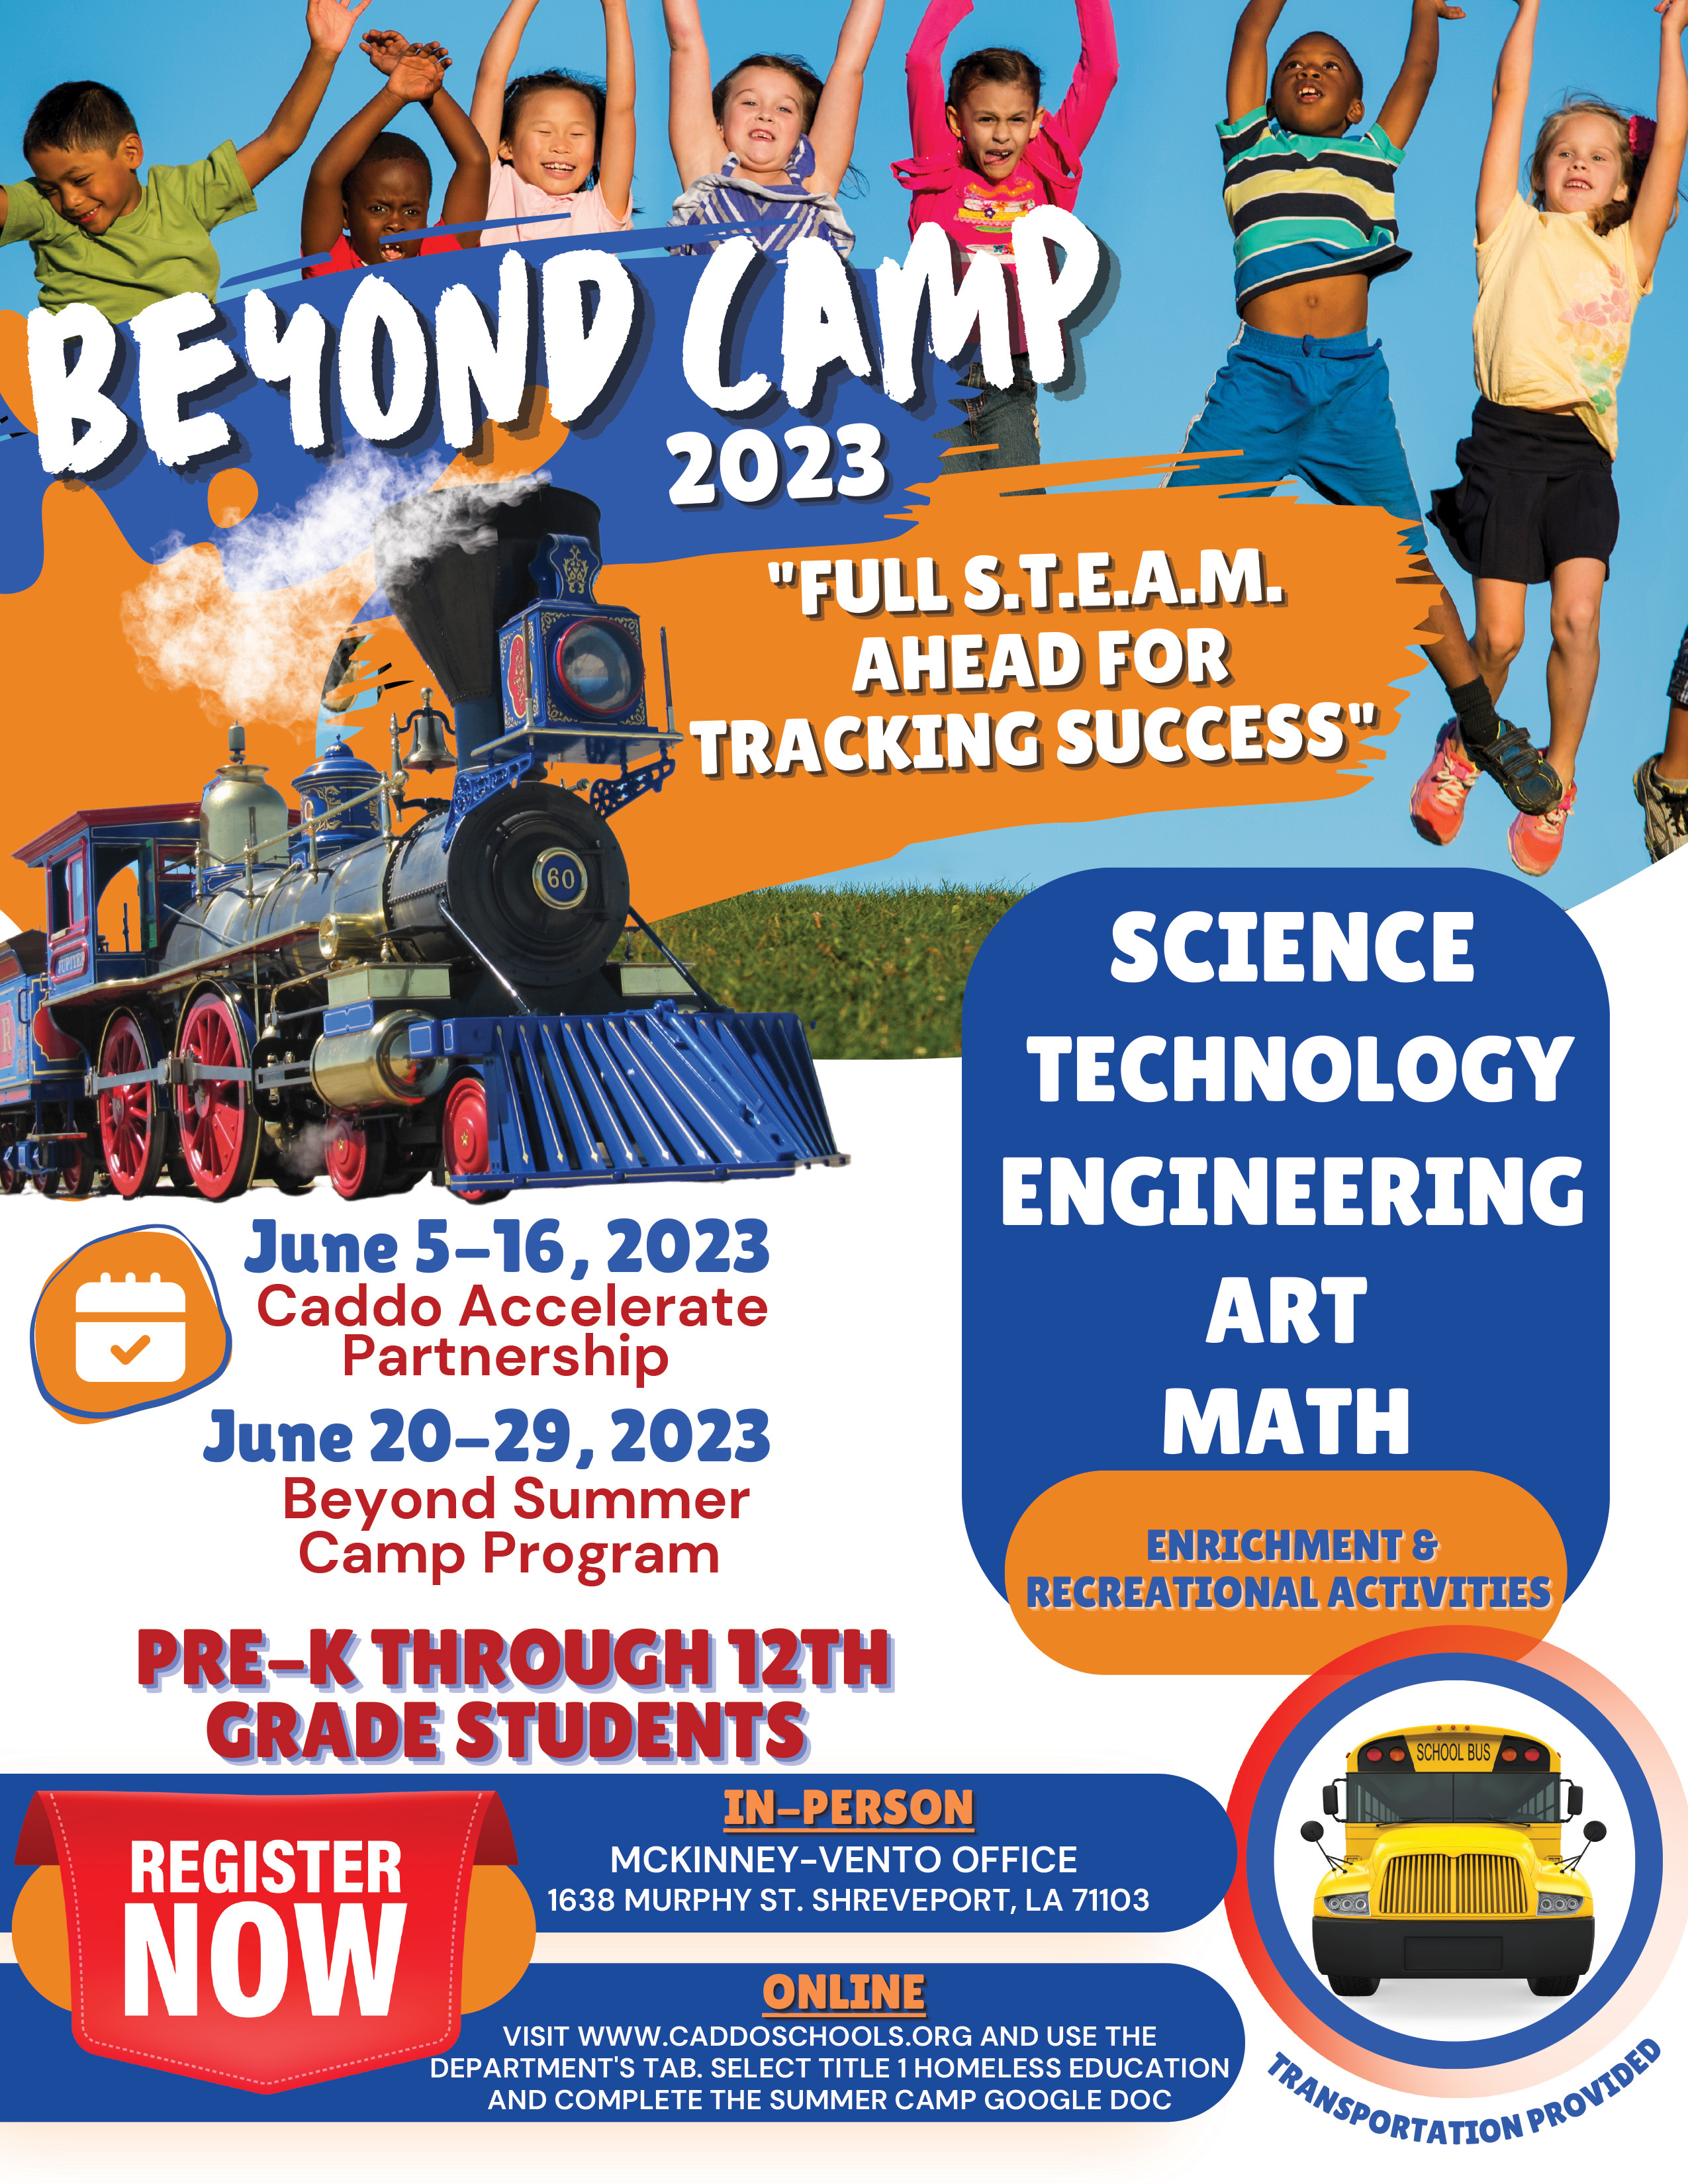 BEYOND CAMP 2023 "FULL S.T.E.A.M. AHEAD FOR TRACKING SUCCESS" SCIENCE TECHNOLOGY ENGINEERING ART MATH ENRICHMENT & RECREATIONAL ACTIVITIES June 5-16, 2023 Caddo Accelerate Partnership June 19-29, 2023 Beyond Summer Camp Program PRE-K THROUGH 12TH GRADE STUDENTS IN-PERSON REGISTER NOW MCKINNEY-VENTO OFFICE 1638 MURPHY ST. SHREVEPORT, LA 71103 ONLINE VISIT WWW.CADDOSCHOOLS.ORG AND USE THE DEPARTMENT'S TAB. SELECT TITLE 1 HOMELESS EDUCATION, AND COMPLETE THE SUMMER CAMP GOOGLE DOC